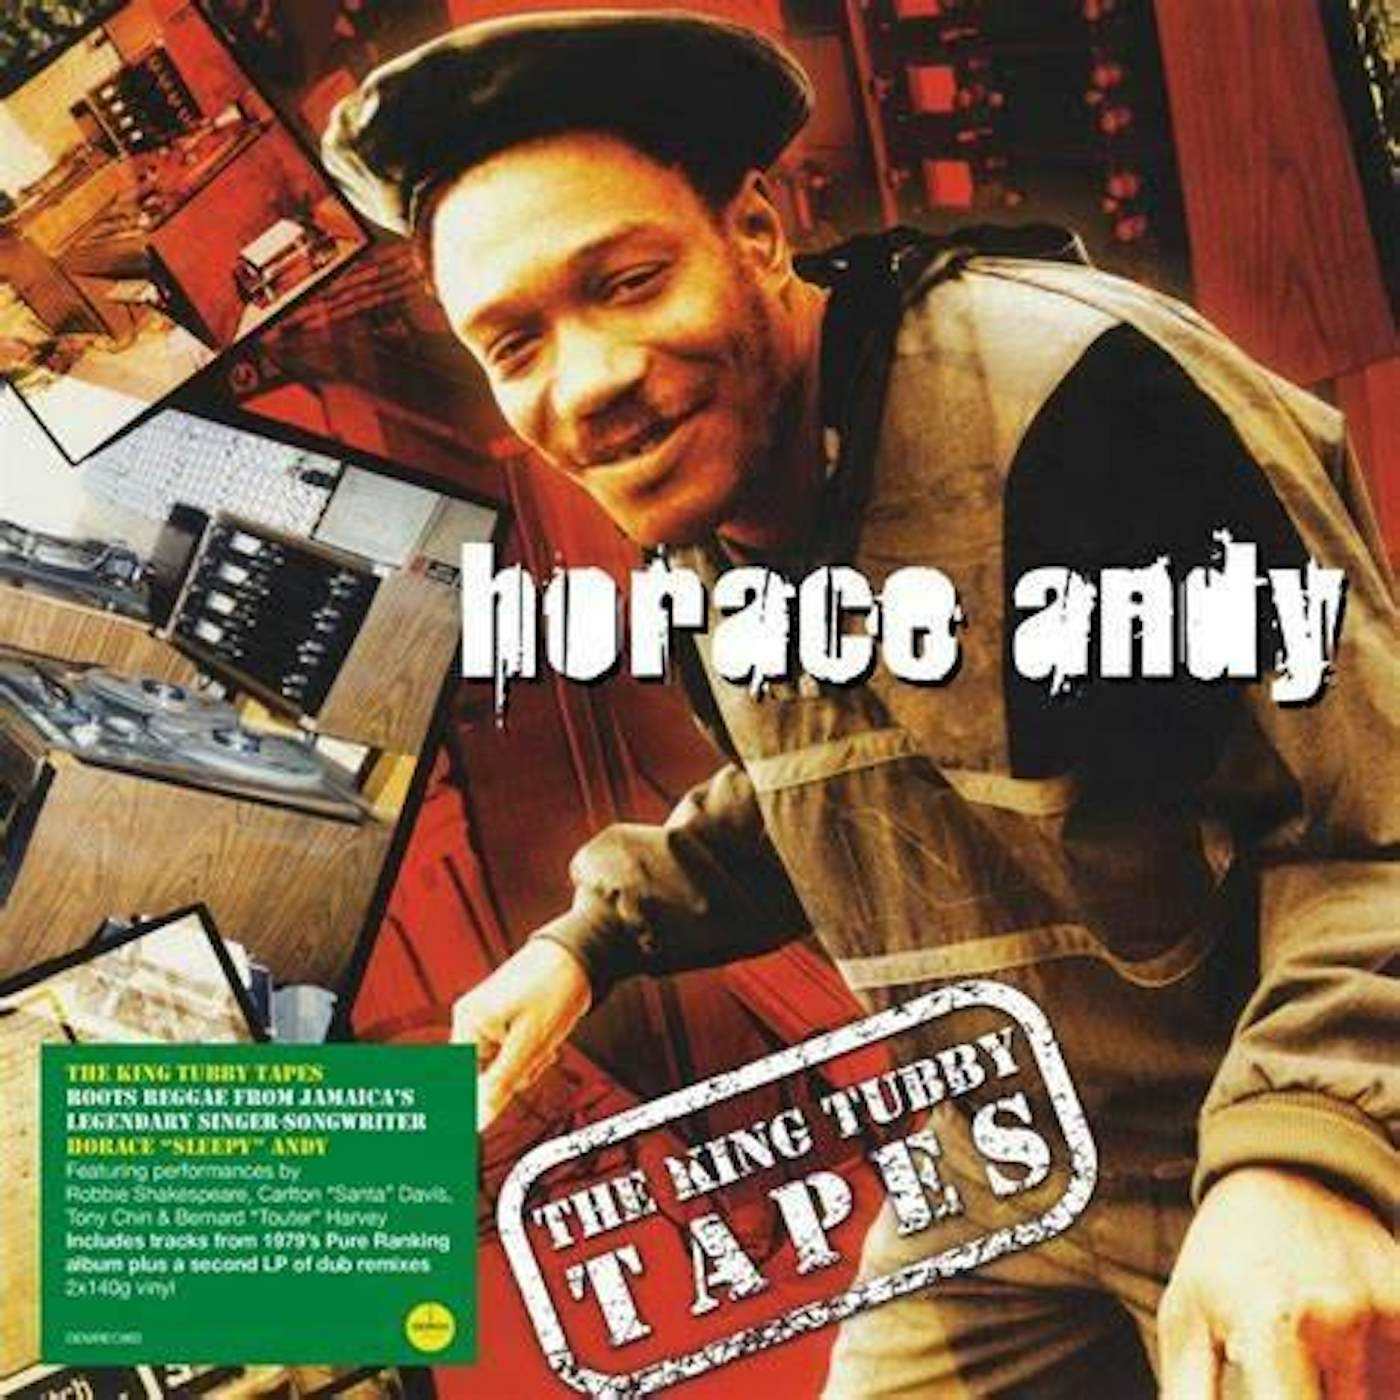 Horace Andy KING TUBBY TAPES (140G/2LP) Vinyl Record